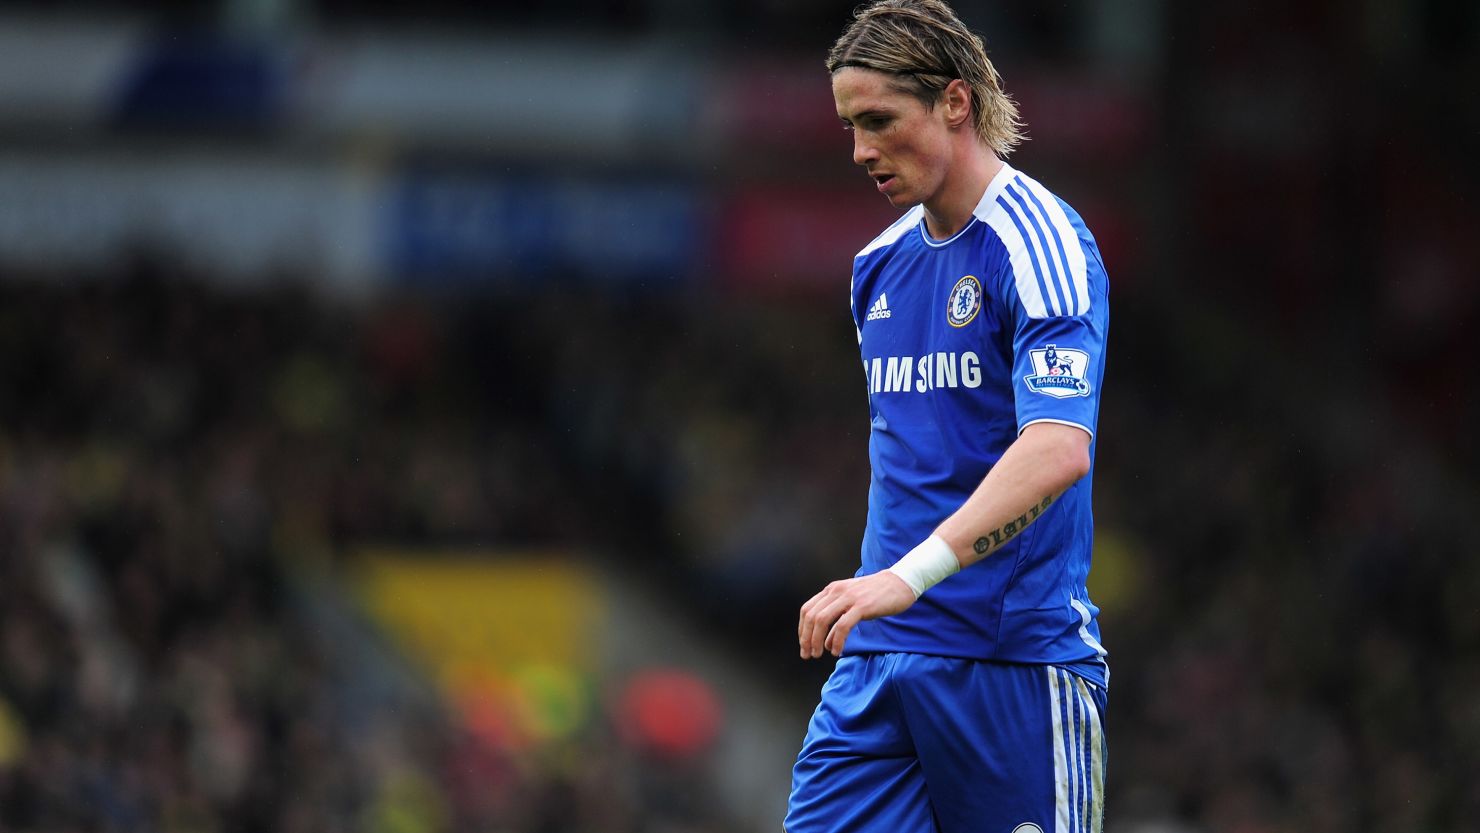 Fernando Torres cuts a forlorn figure as he and Chelsea failed to score against Norwich City on Saturday 